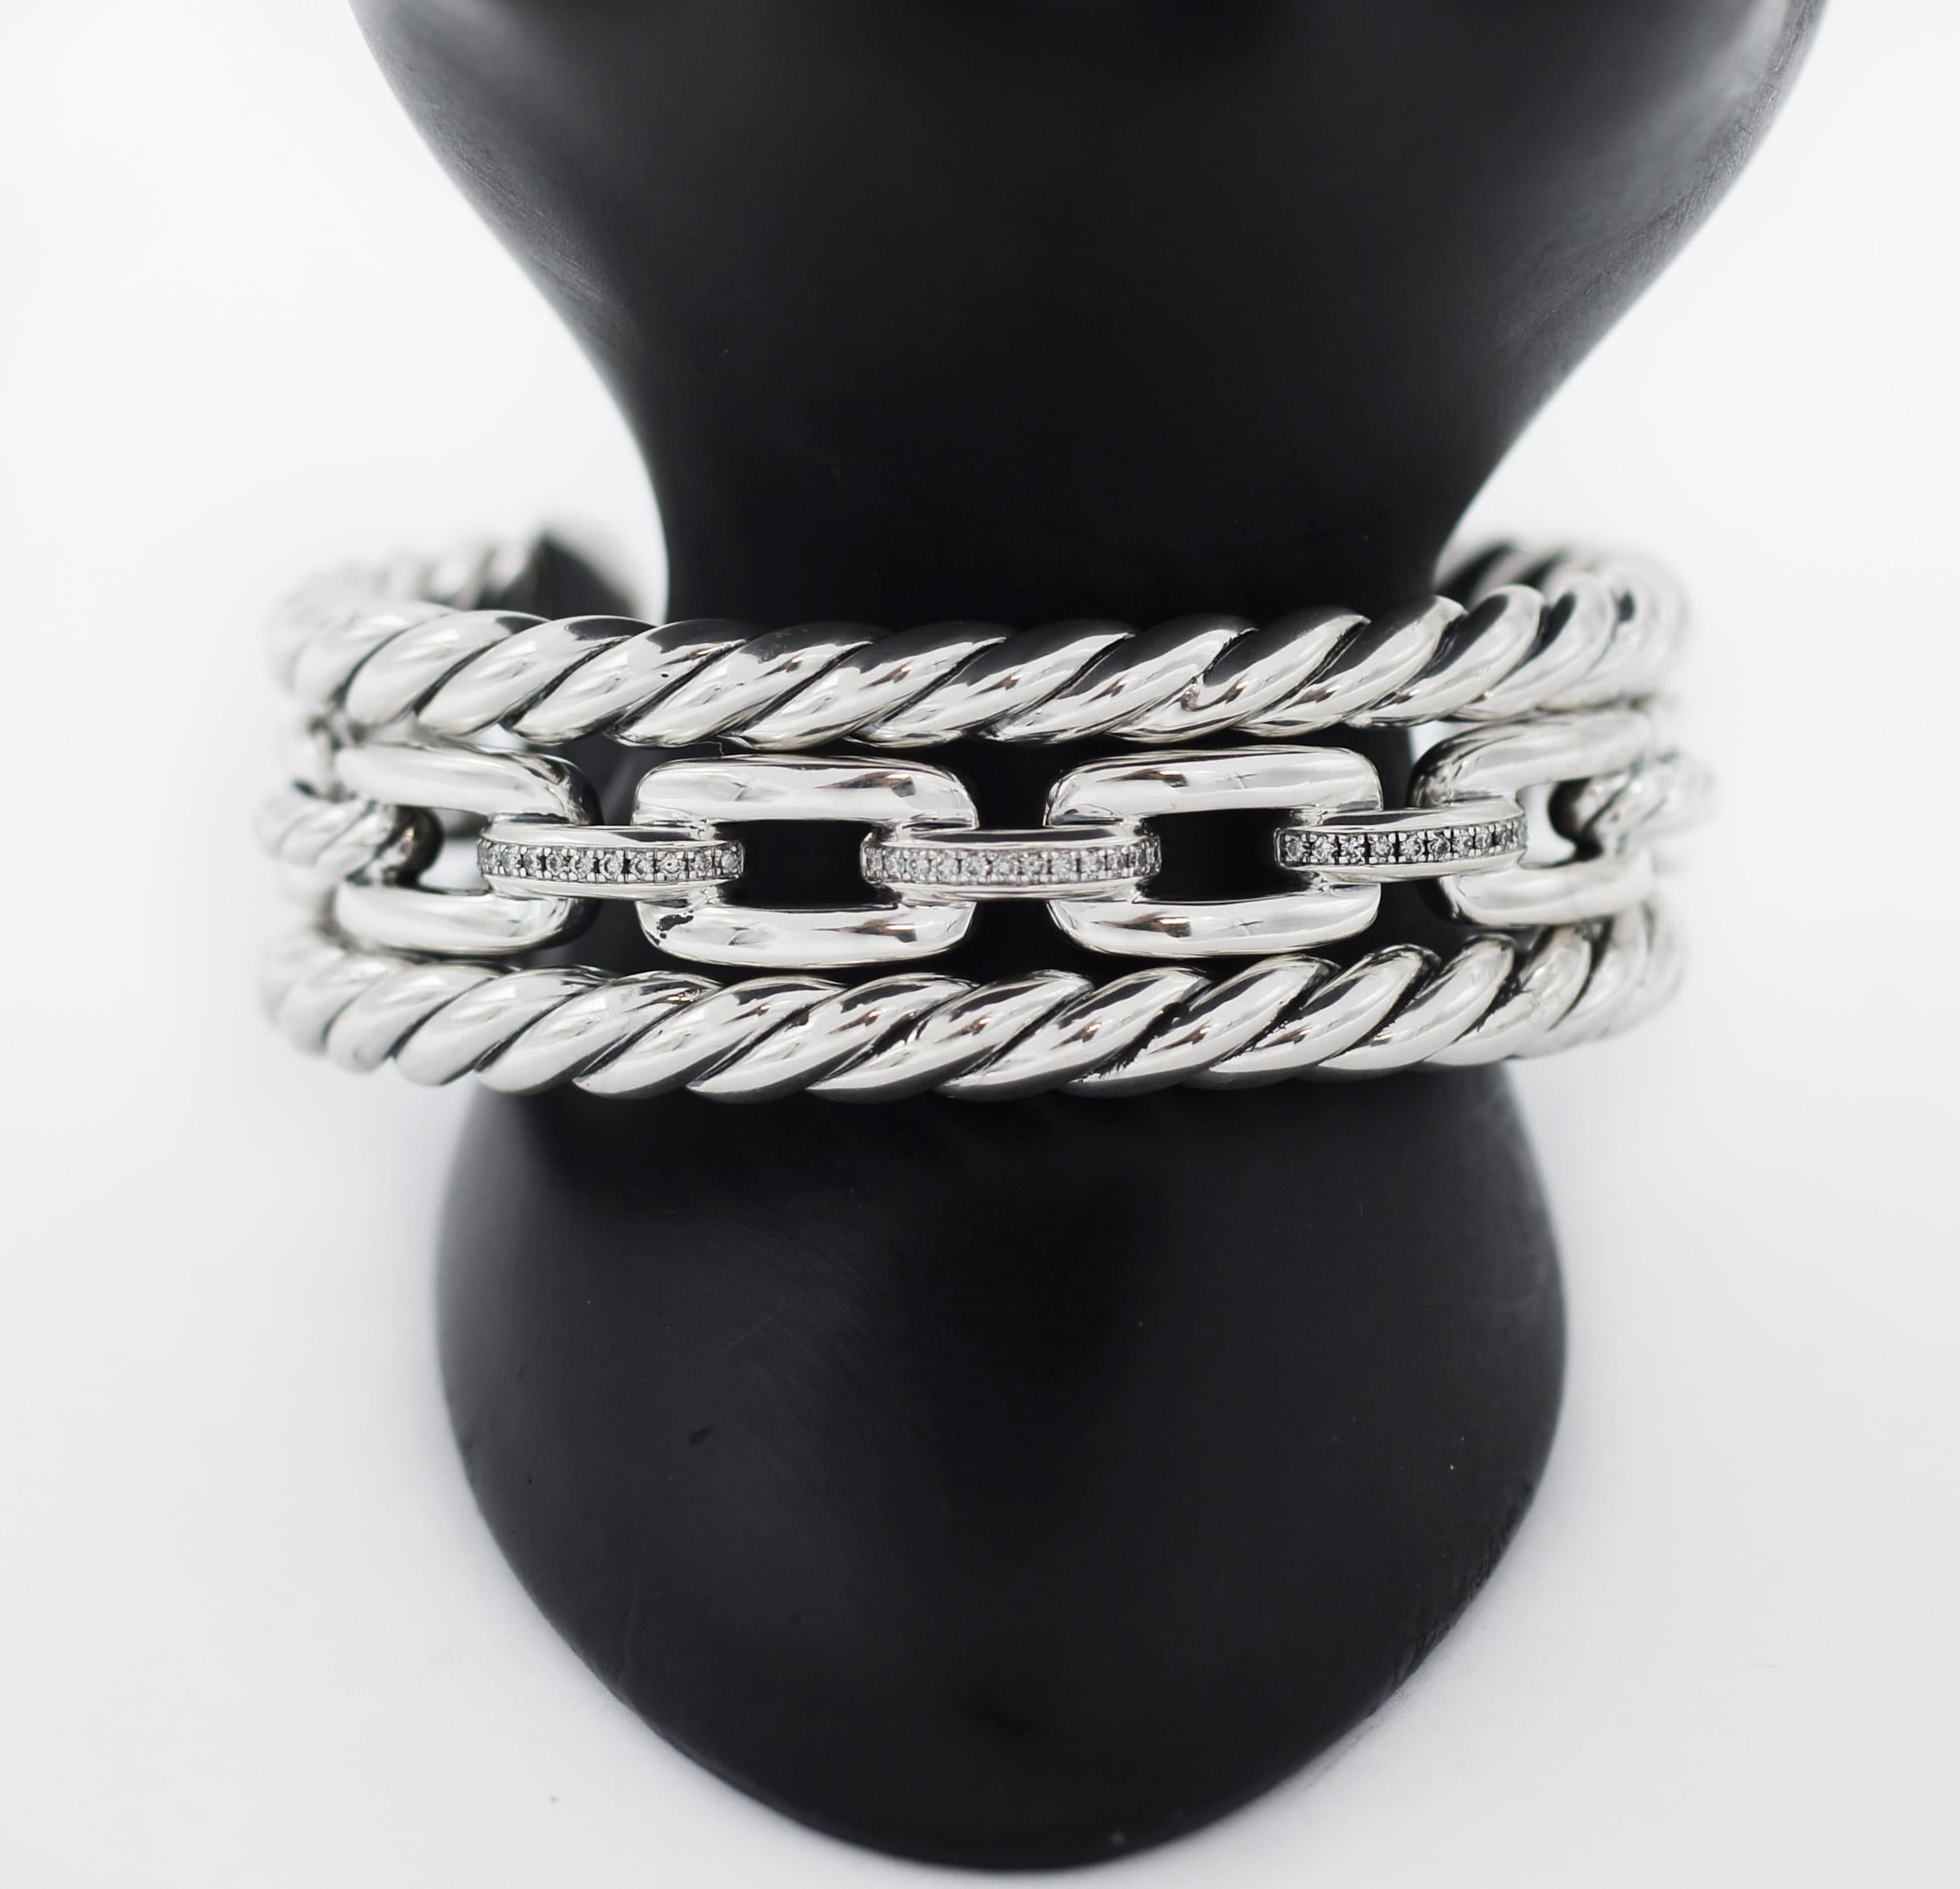 DAVID YURMAN
From the Wellesley Collection.
Wellesley Link combines three of David Yurman's most iconic design elements-oval link chain, the Cable motif and diamonds set in Sterling Silver-for a timeless collection that makes a bold architectural